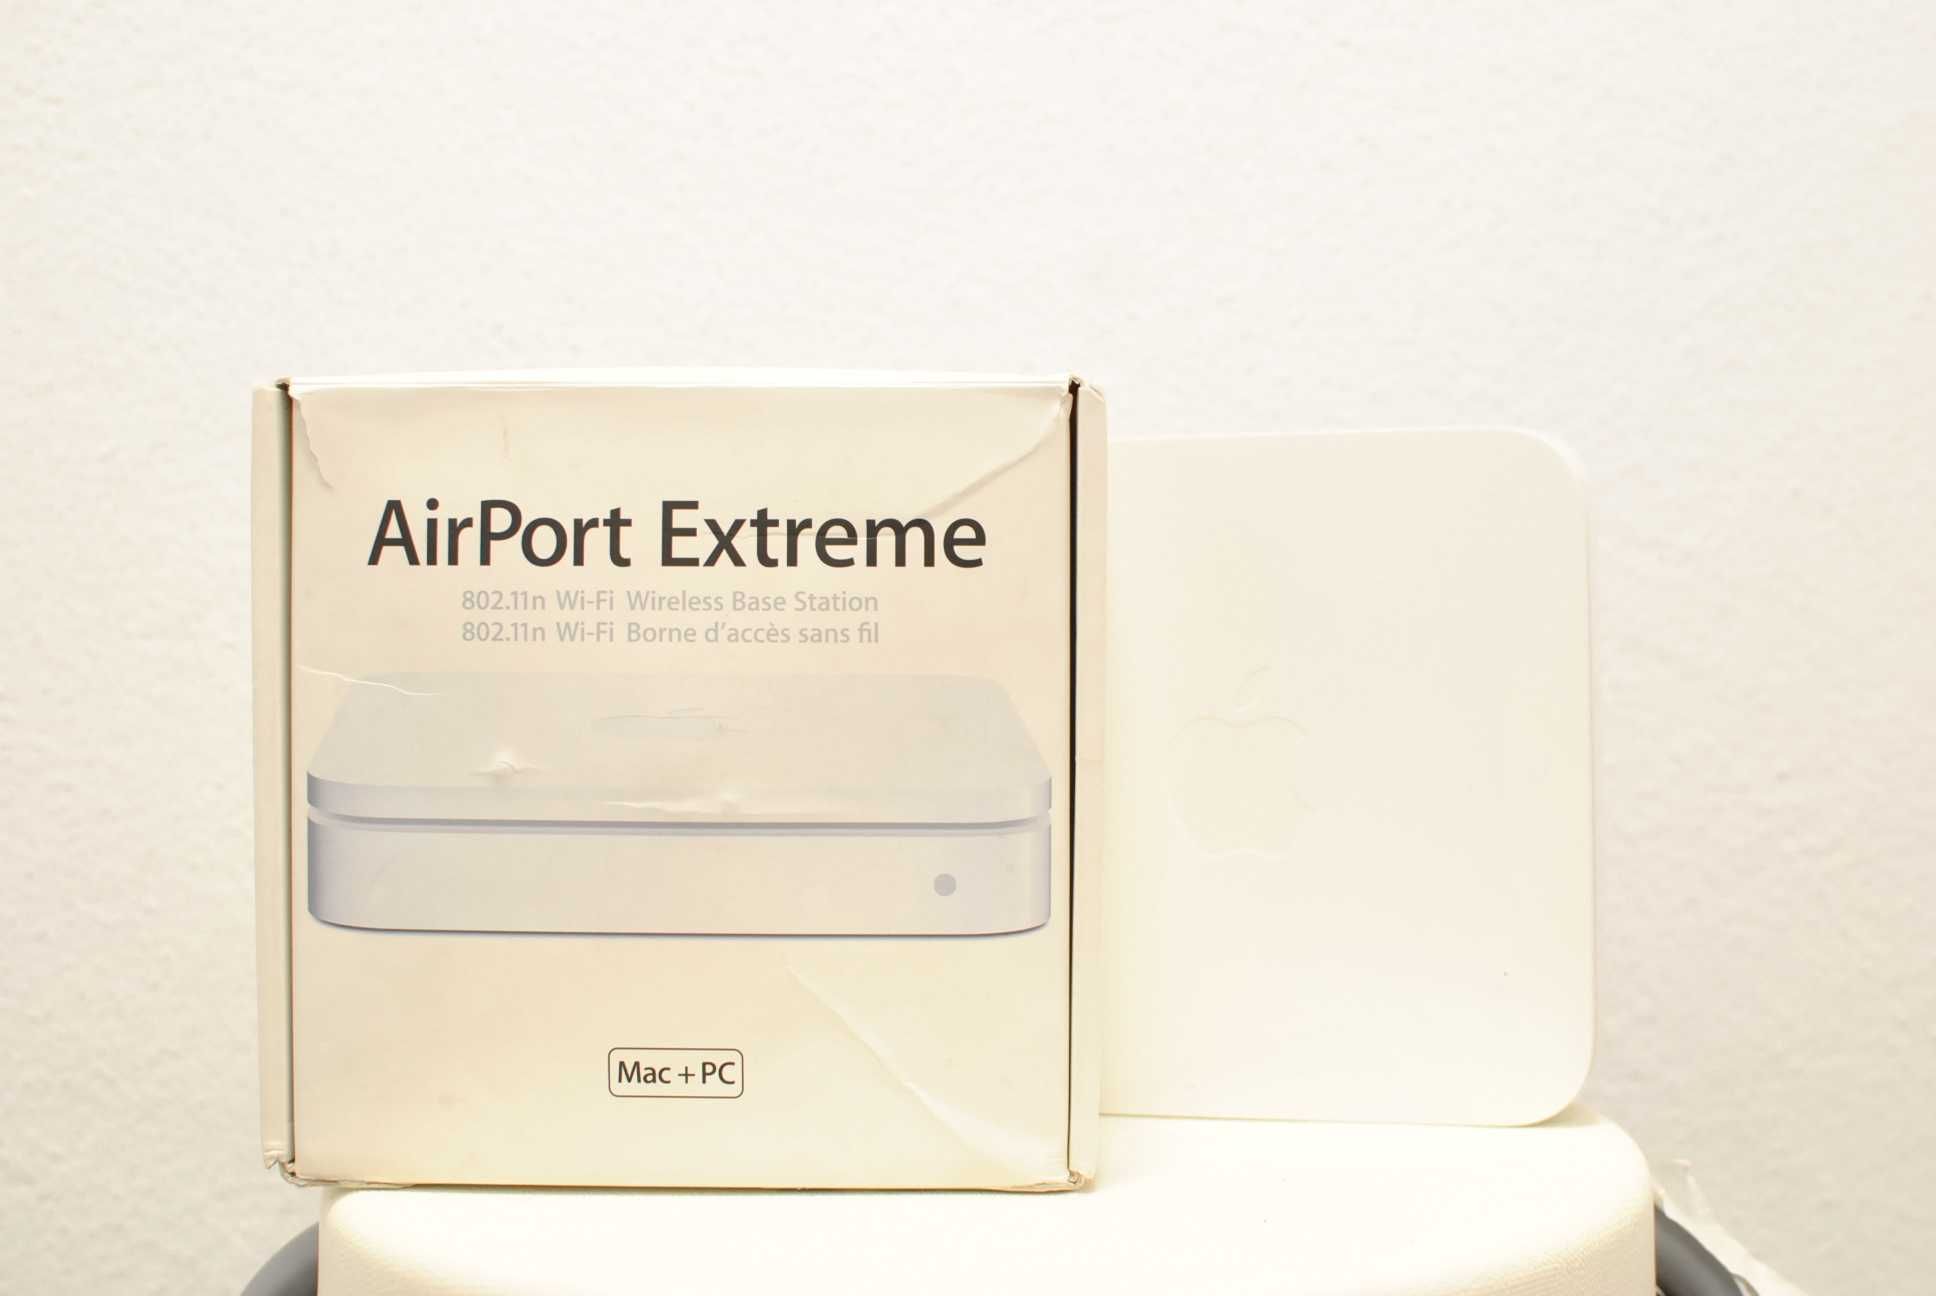 Apple router Wifi Airport Extreme 802.11nn ,base station